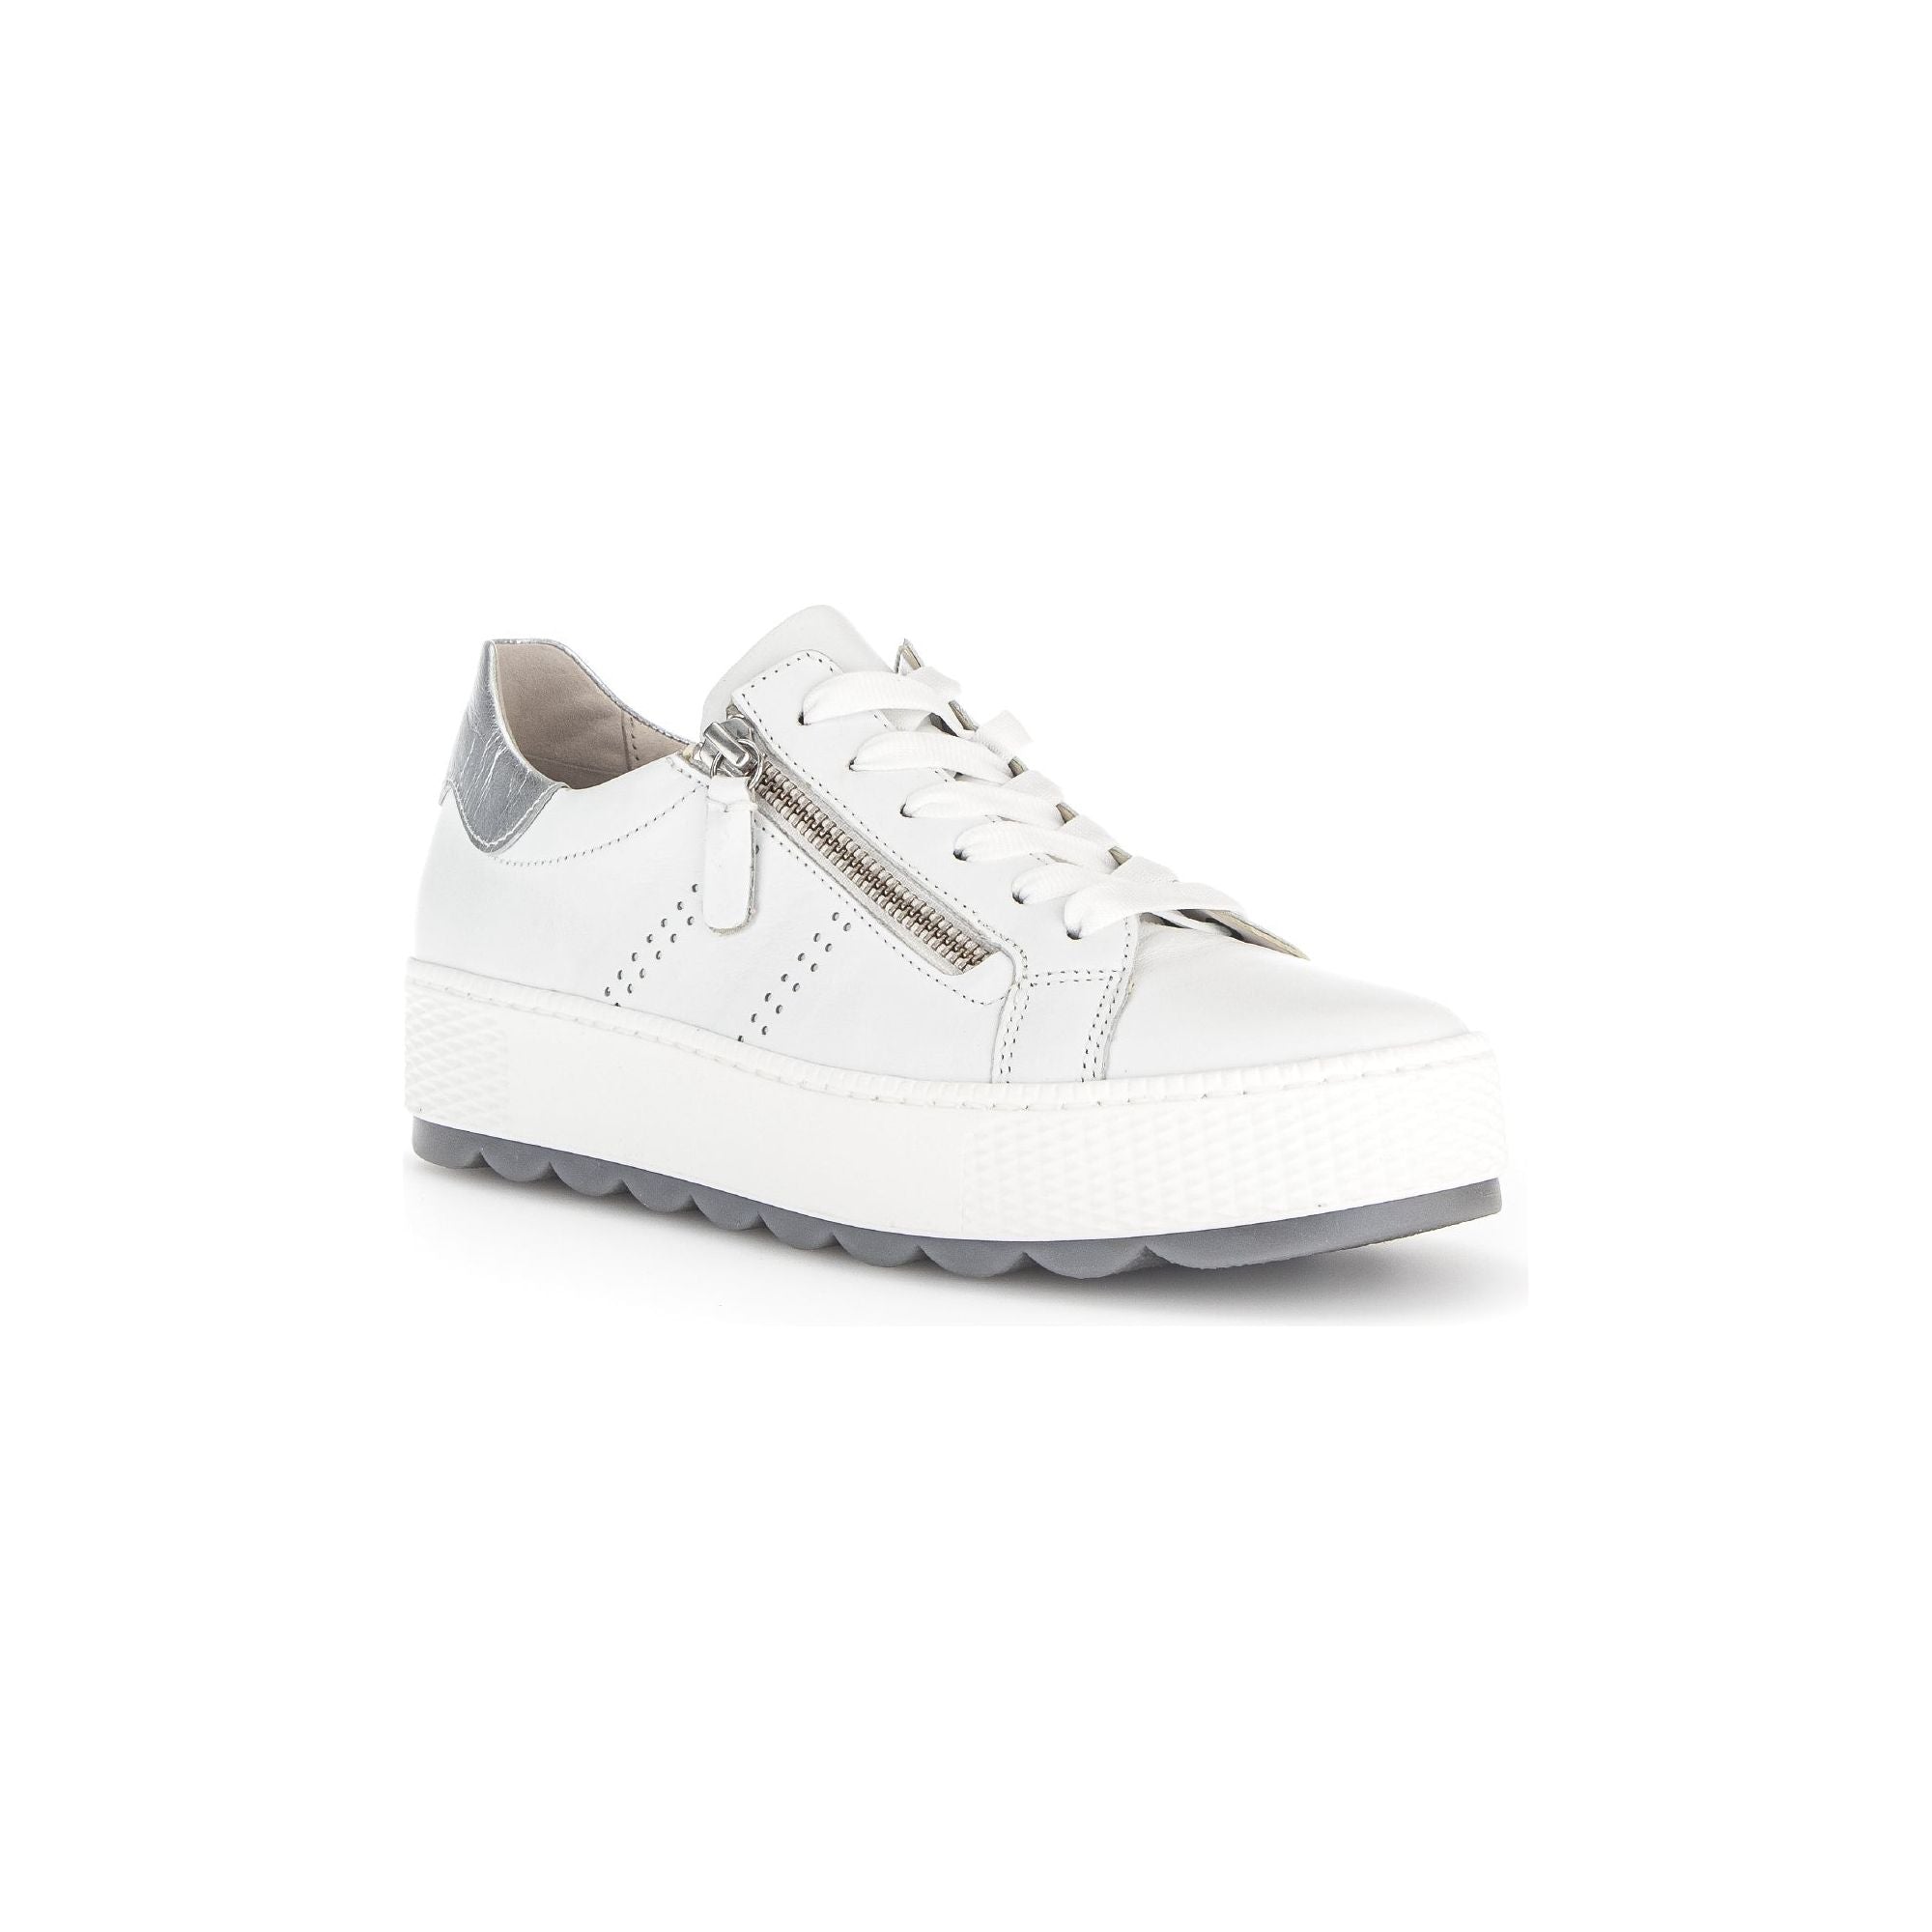 Gabor Quench (46.058.50)- Ladies Lace Trainer with Side Zip in White. Gabor Shoes | Ladies Shoes | Wisemans Bantry | Shoe Shop | West Cork | Munster | Ireland